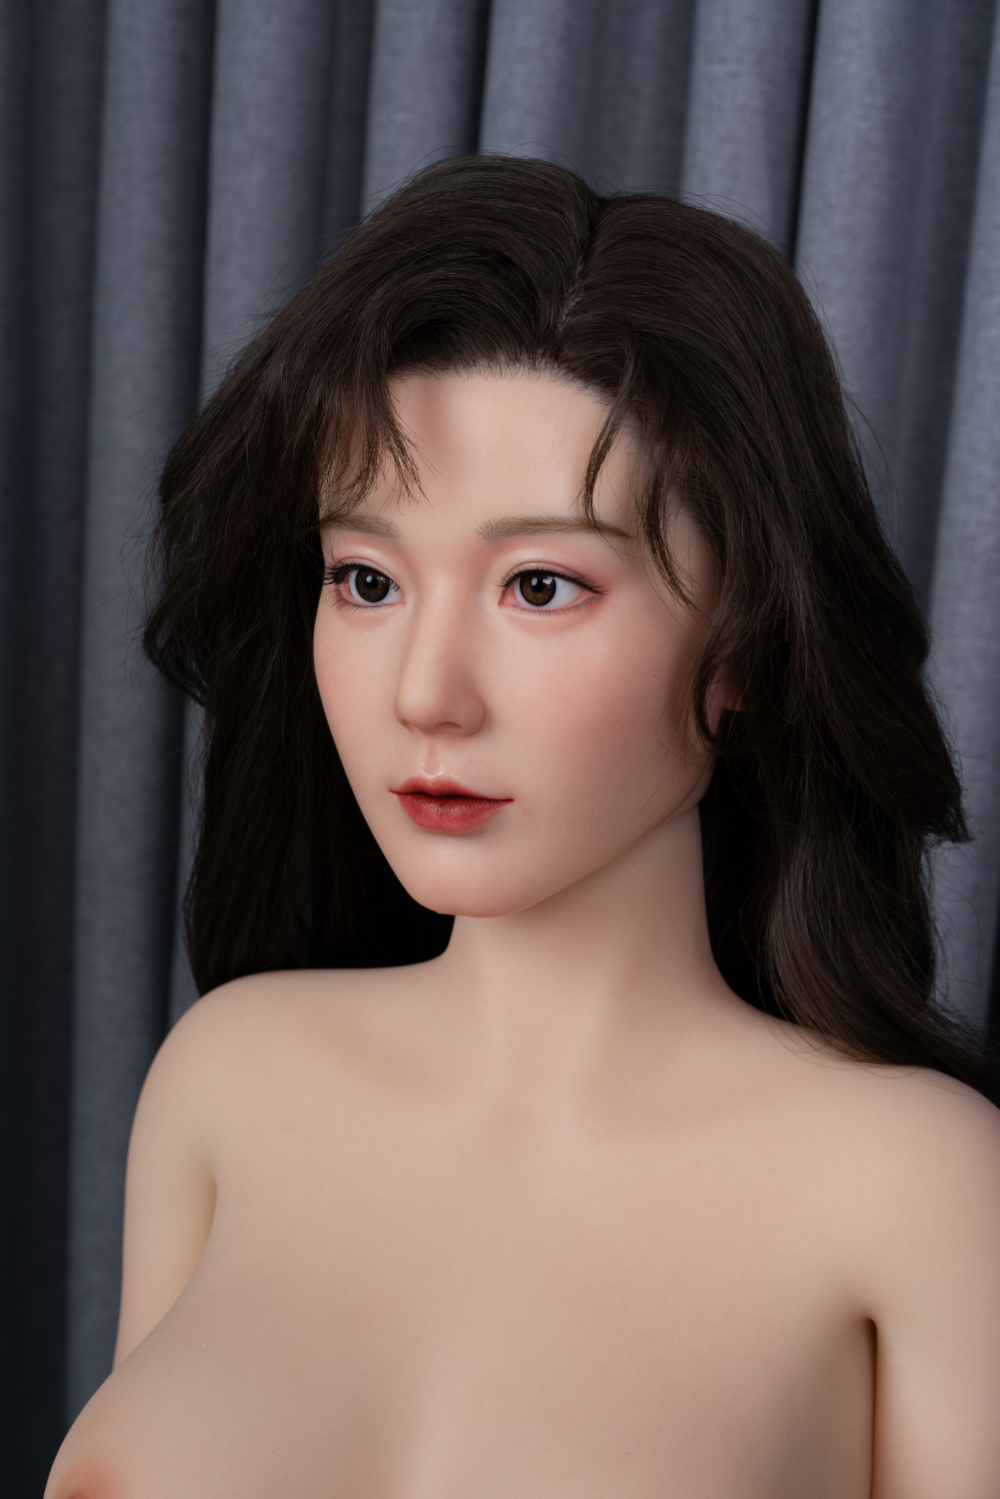 Zelex Doll 165 cm F Fusion - Rena | Buy Sex Dolls at DOLLS ACTUALLY